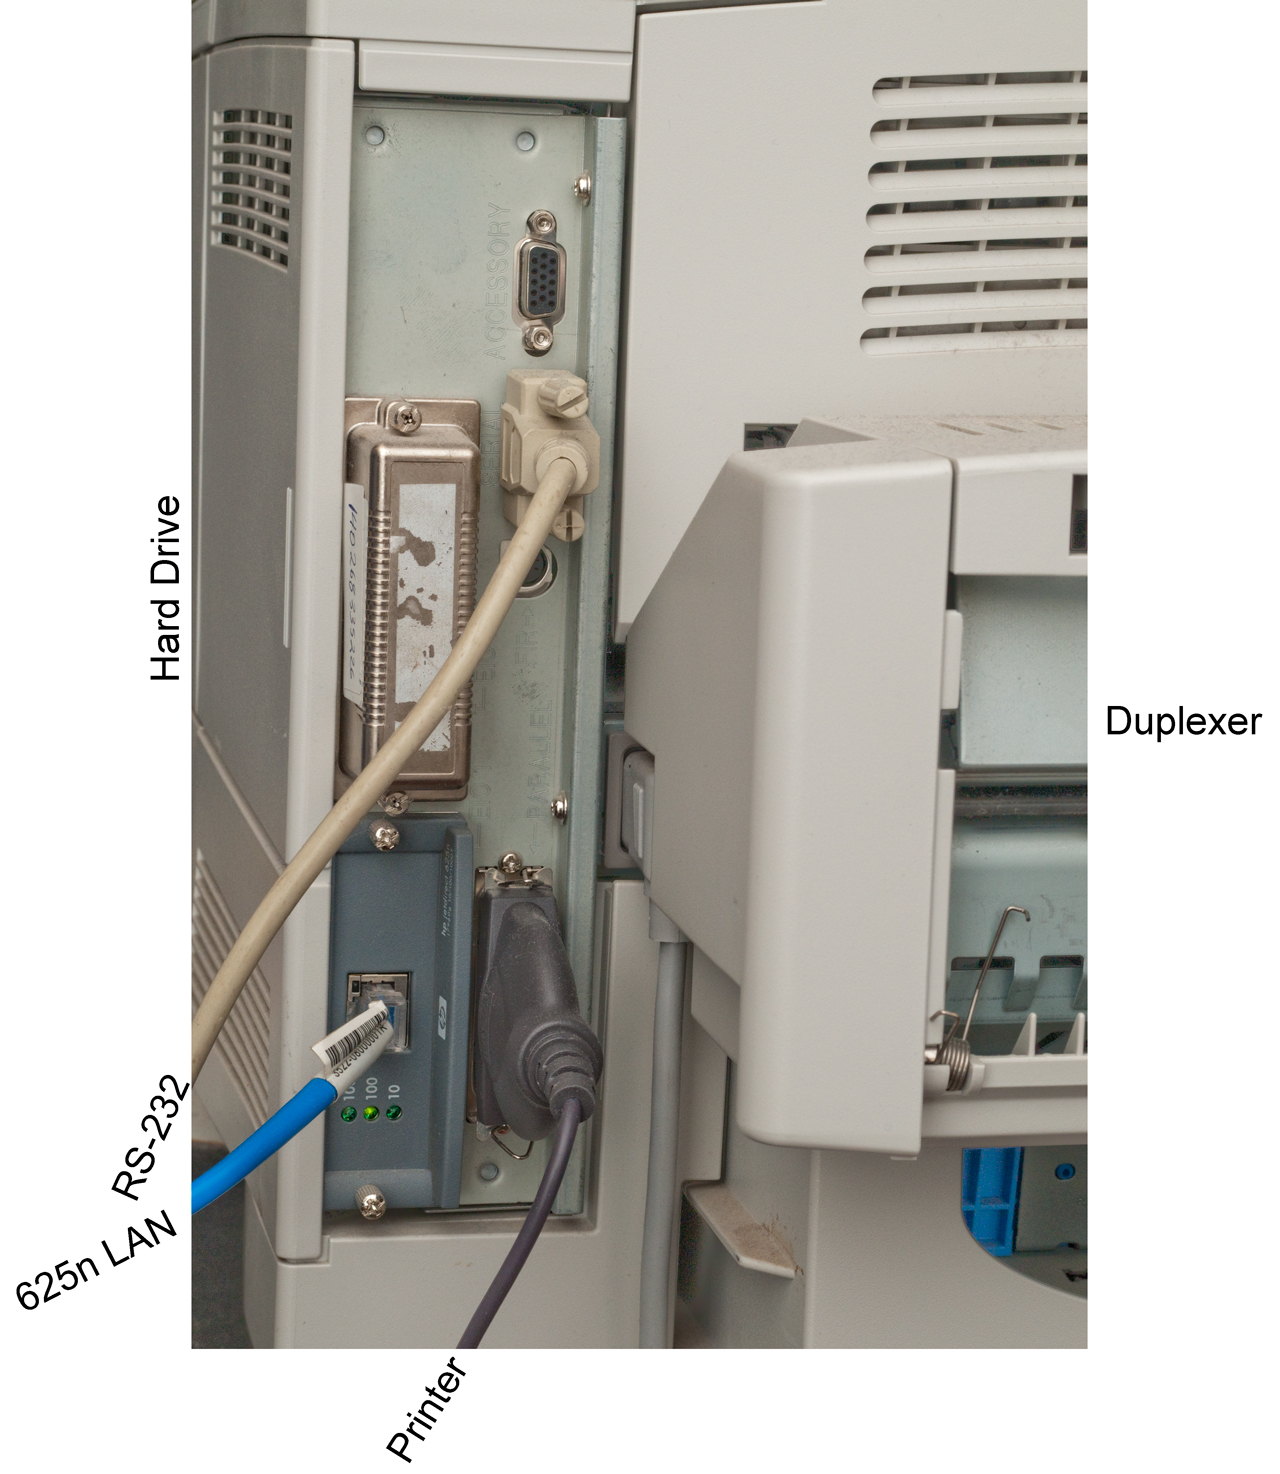 use a usb parallel printer cable to install hp 4050 laser printer